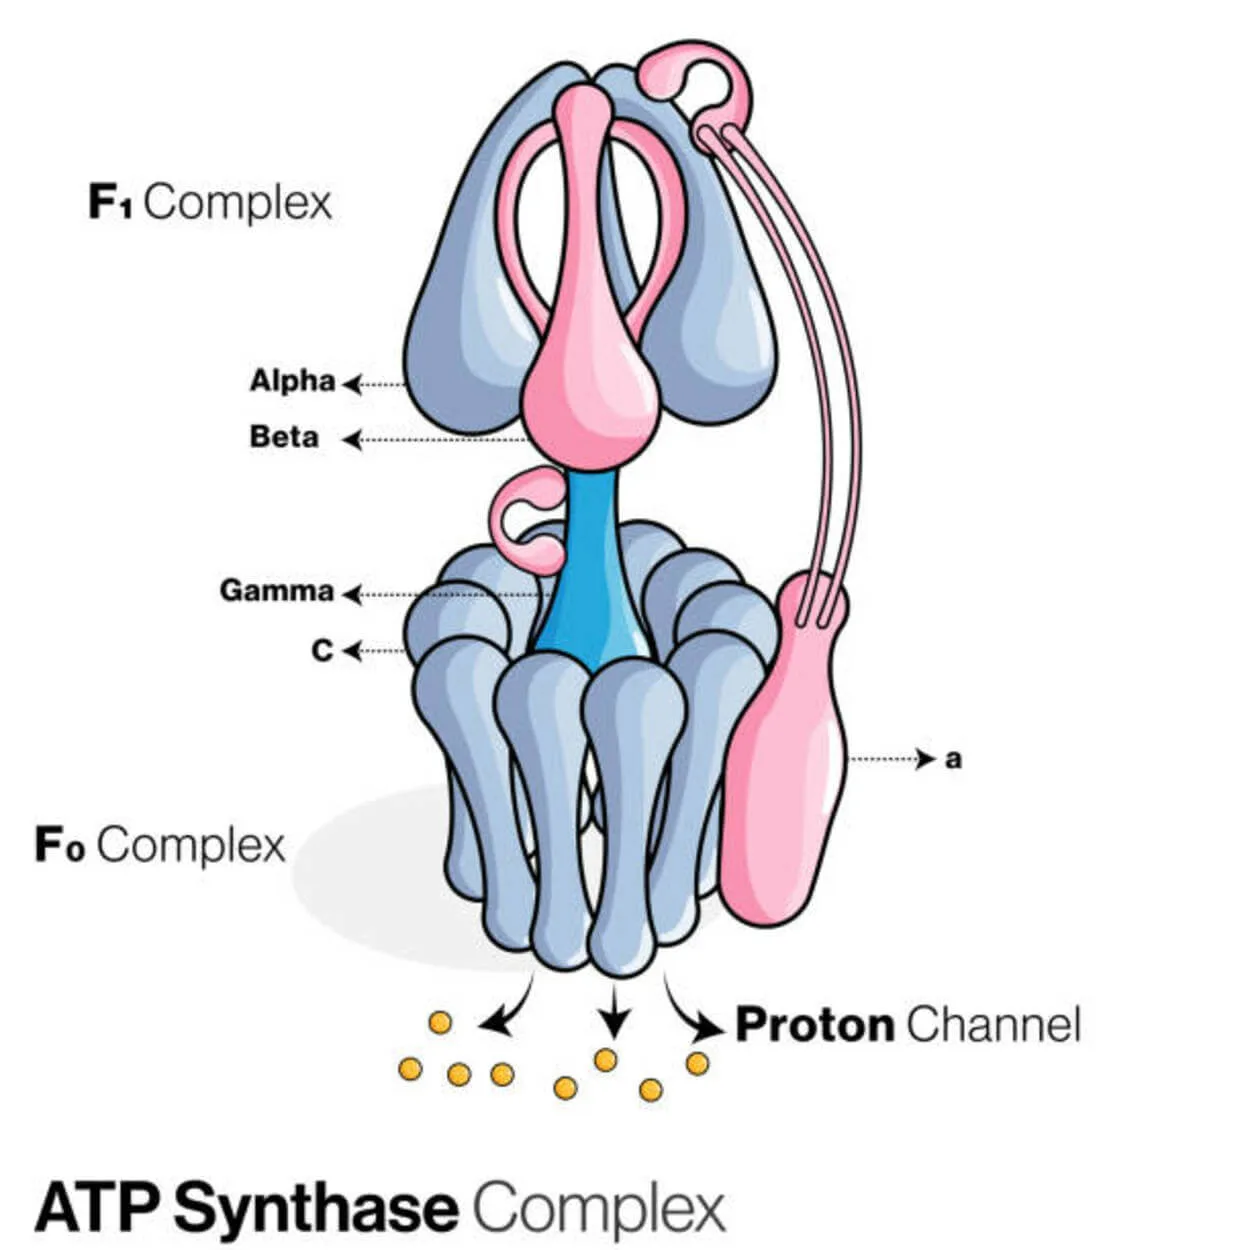 There are different types of Synthase